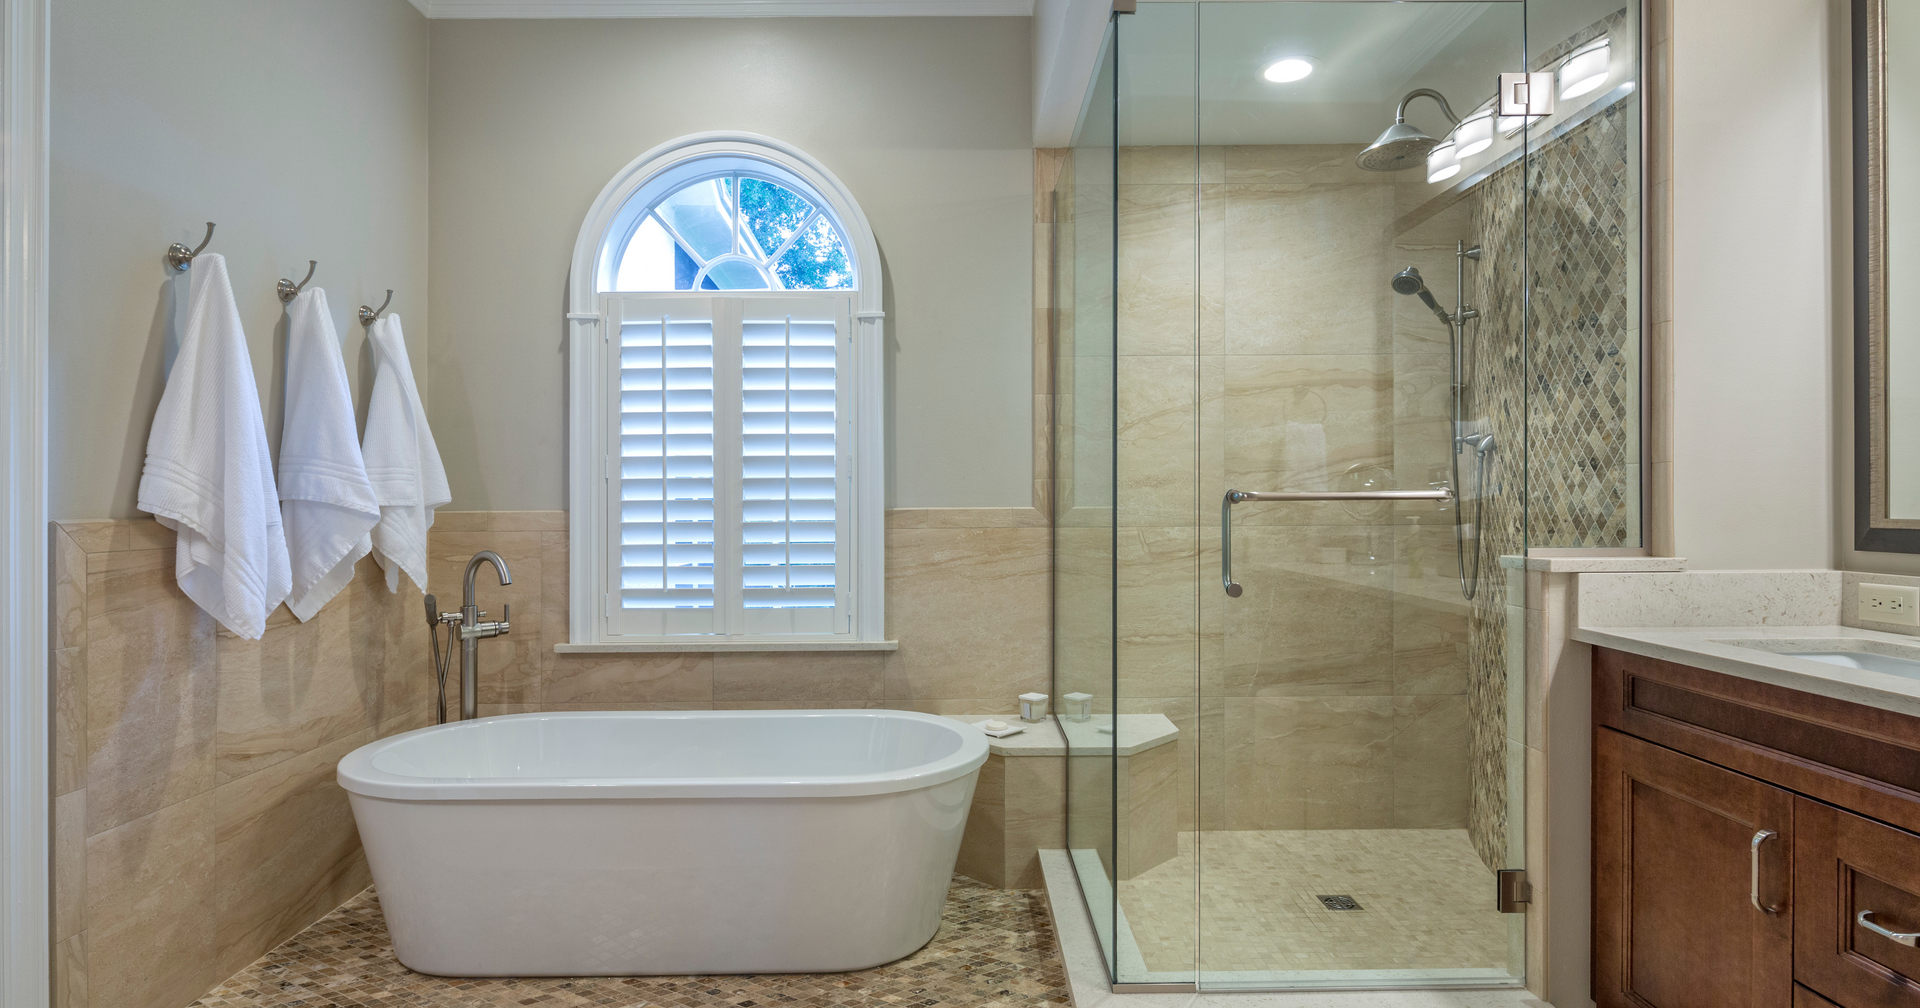 Let's Make Your Bathroom Remodel an Awesome Adventure!